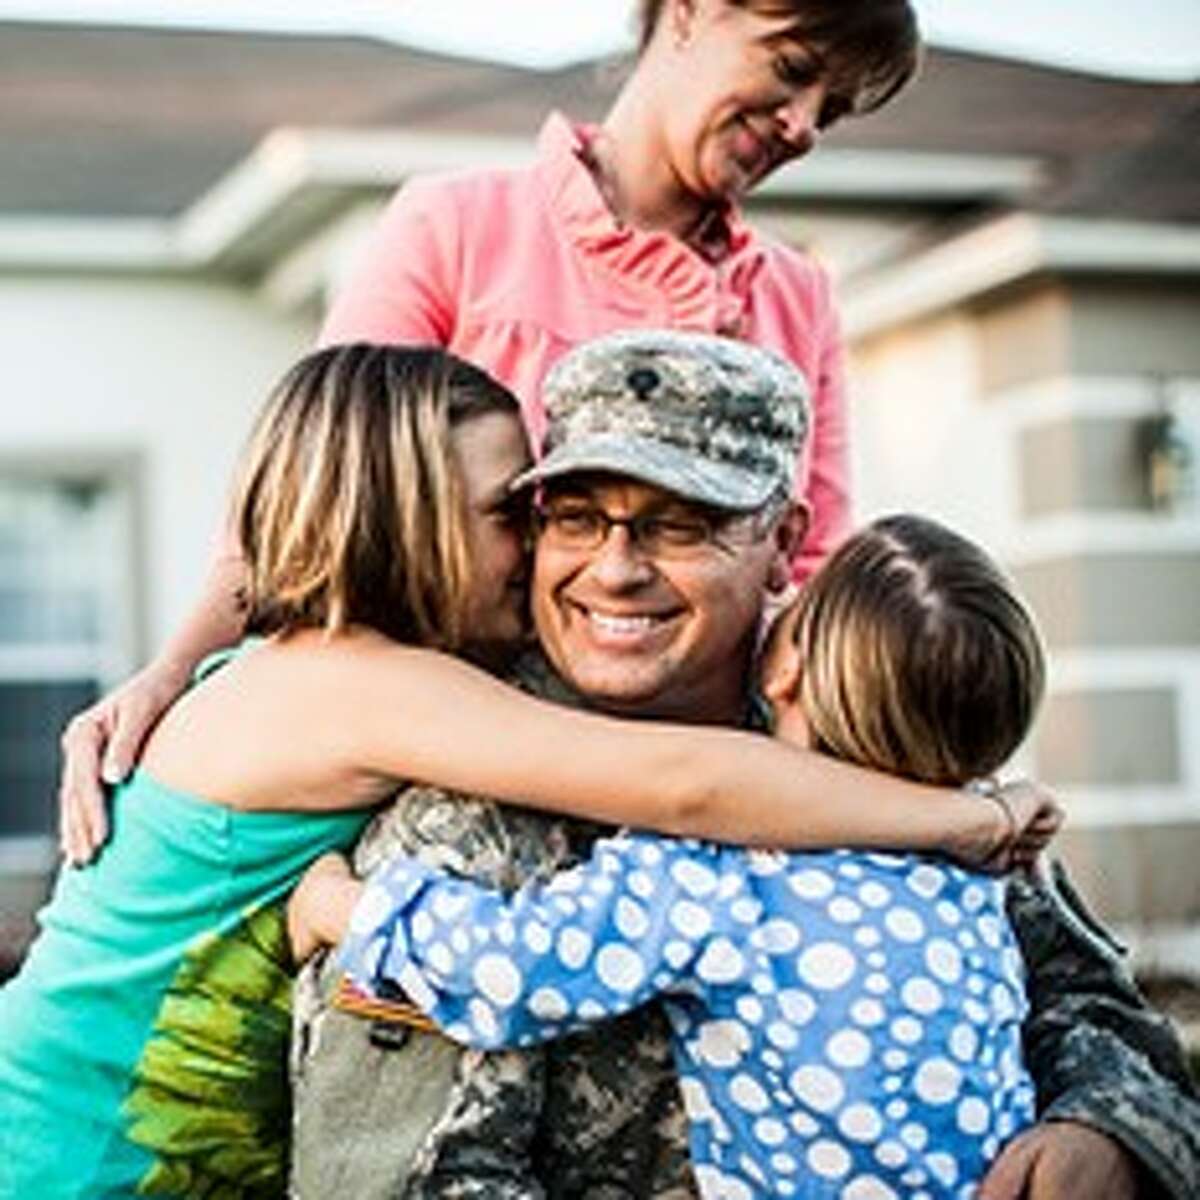 Social Security offers support to wounded warriors. Benefits protect veterans when injuries prevent them from returning to active duty or performing other work. 